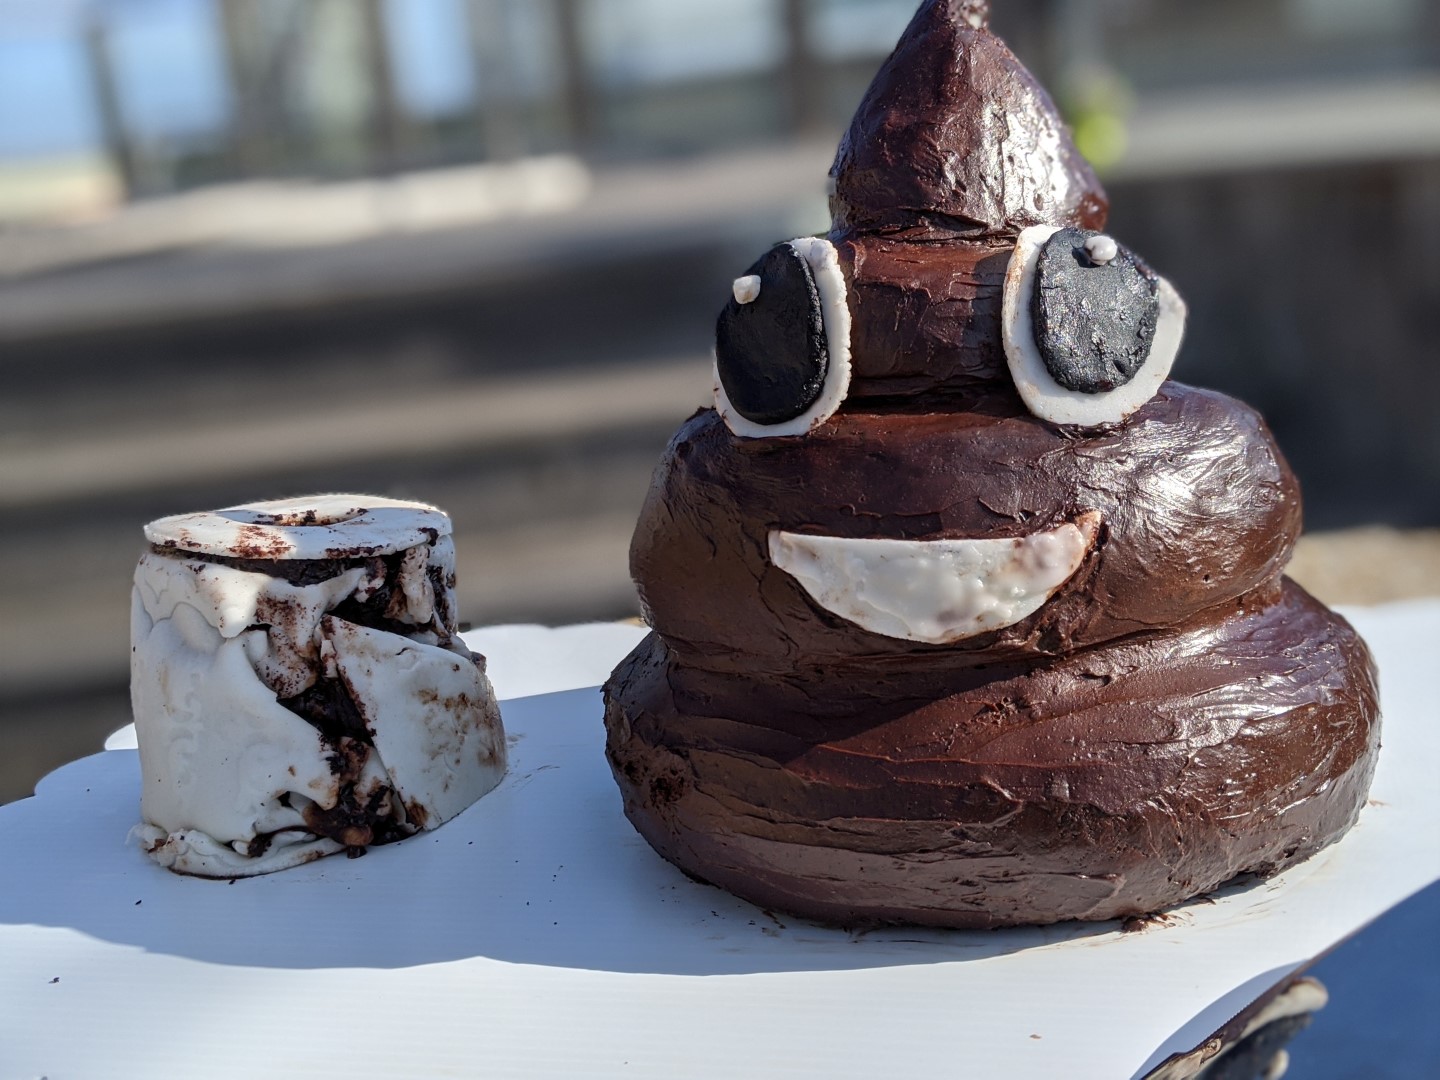 poop cake and toilet paper cake